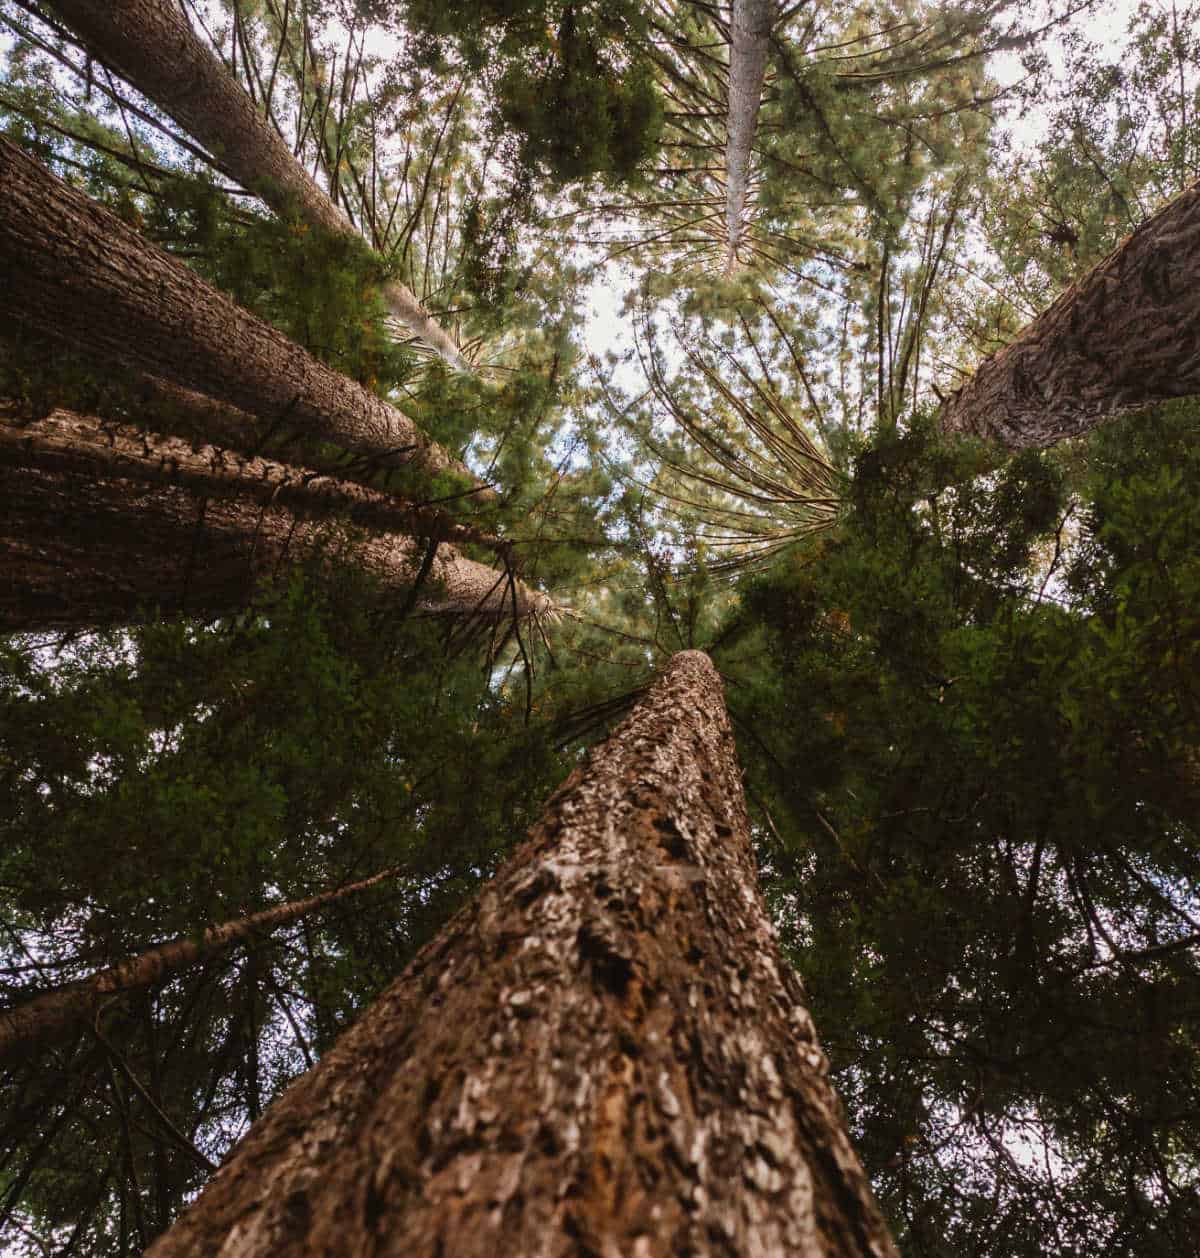 Looking up a giant redwood tree